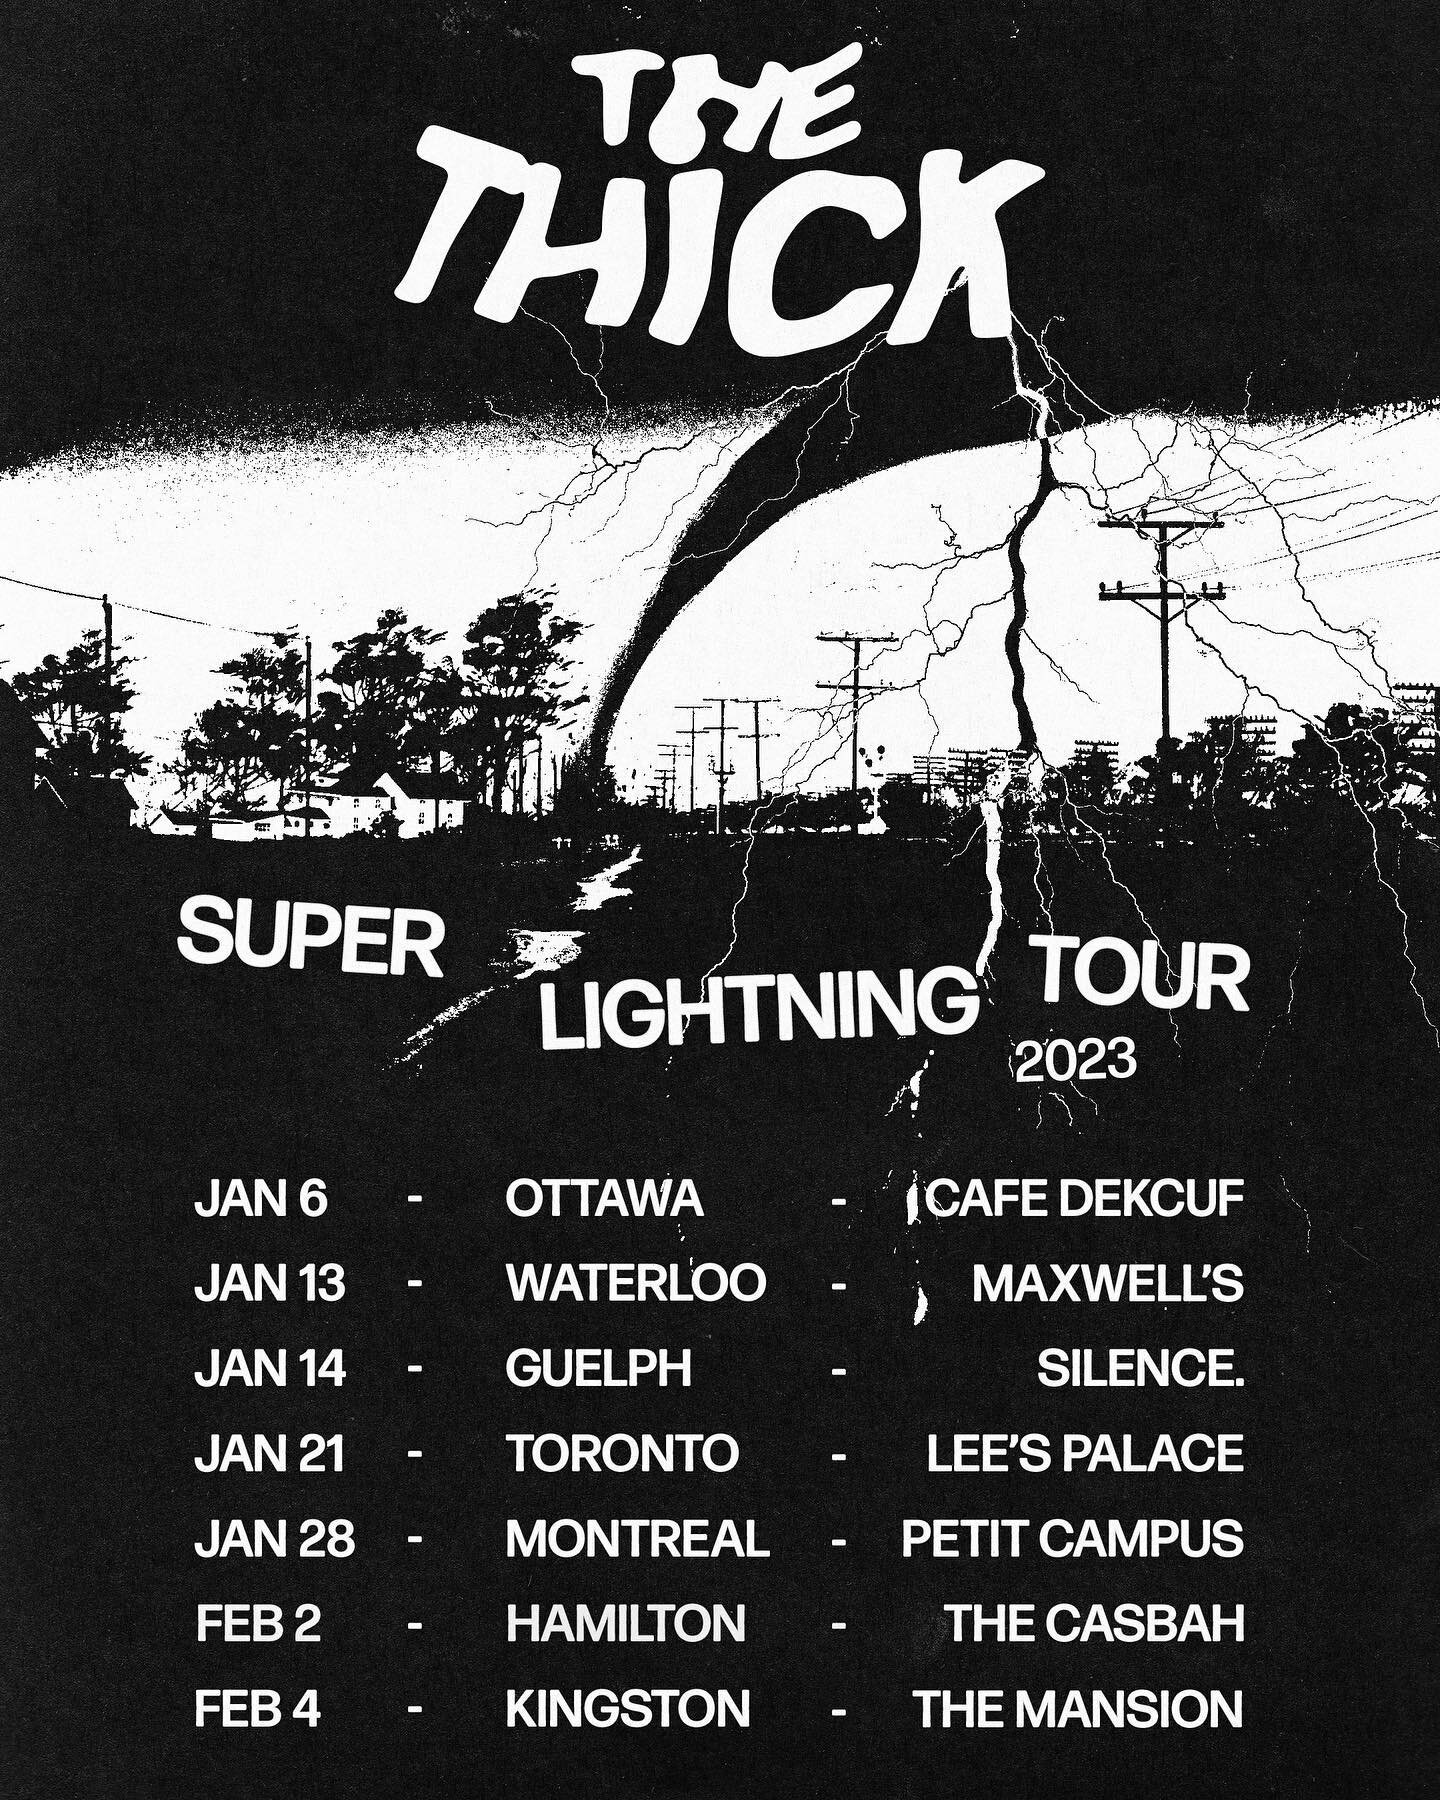 Kicking the new year into maximum overdrive!! Starting it off in Ottawa this weekend 🤘7 show dates with a secret show sprinkled in 🤫 Tickets available now at www.TheThick.ca/tour 🎟